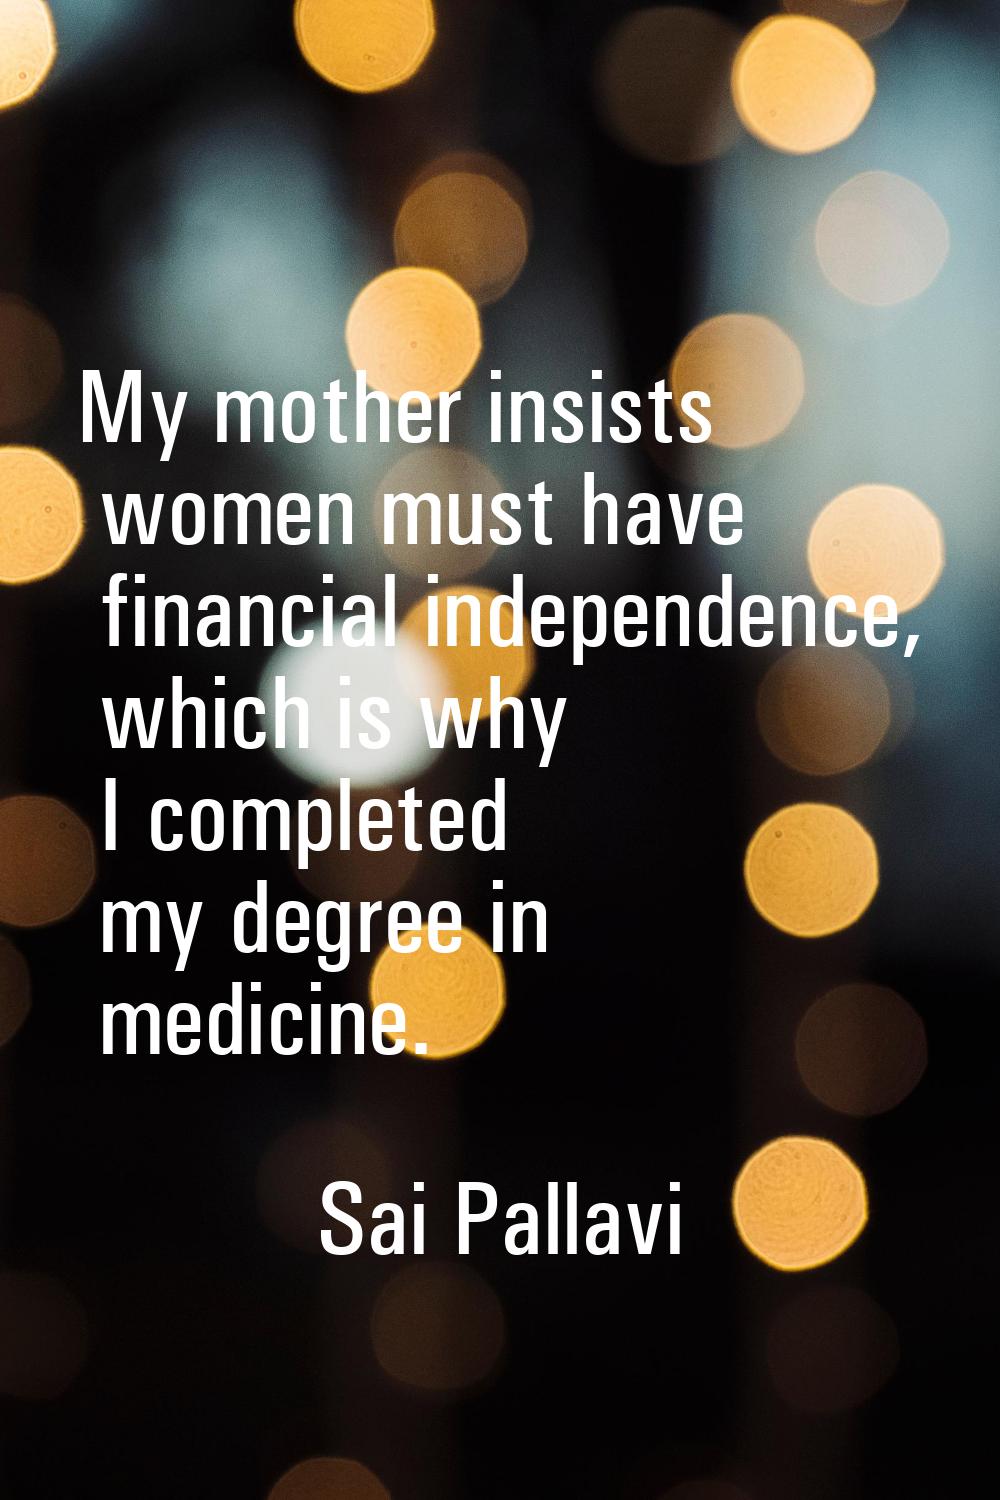 My mother insists women must have financial independence, which is why I completed my degree in med